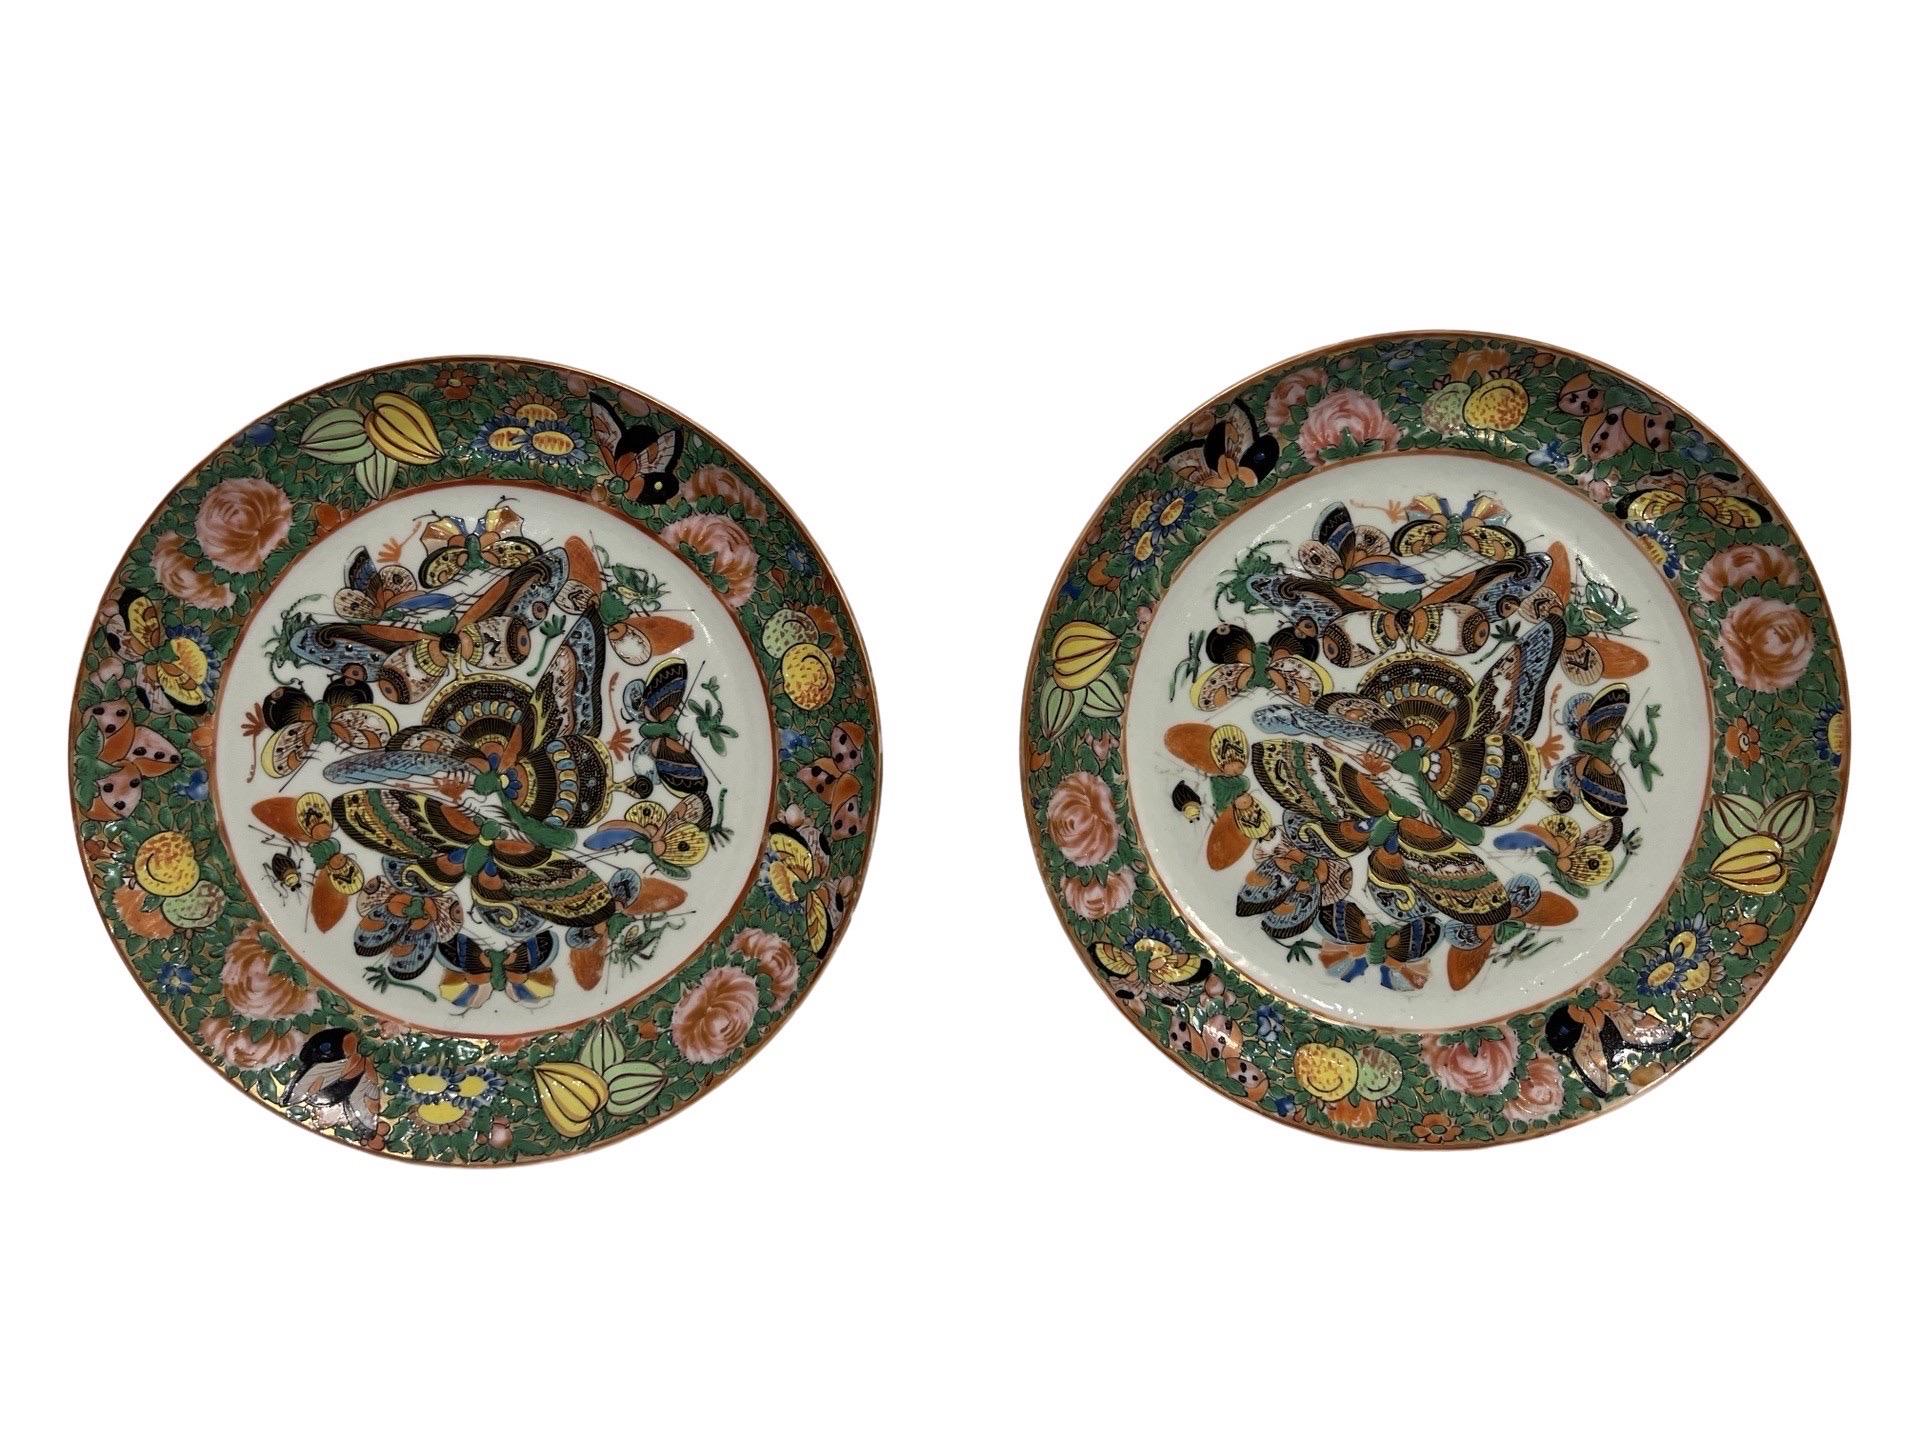 Chinese, early 19th century.

A pair of Chinese export porcelain 